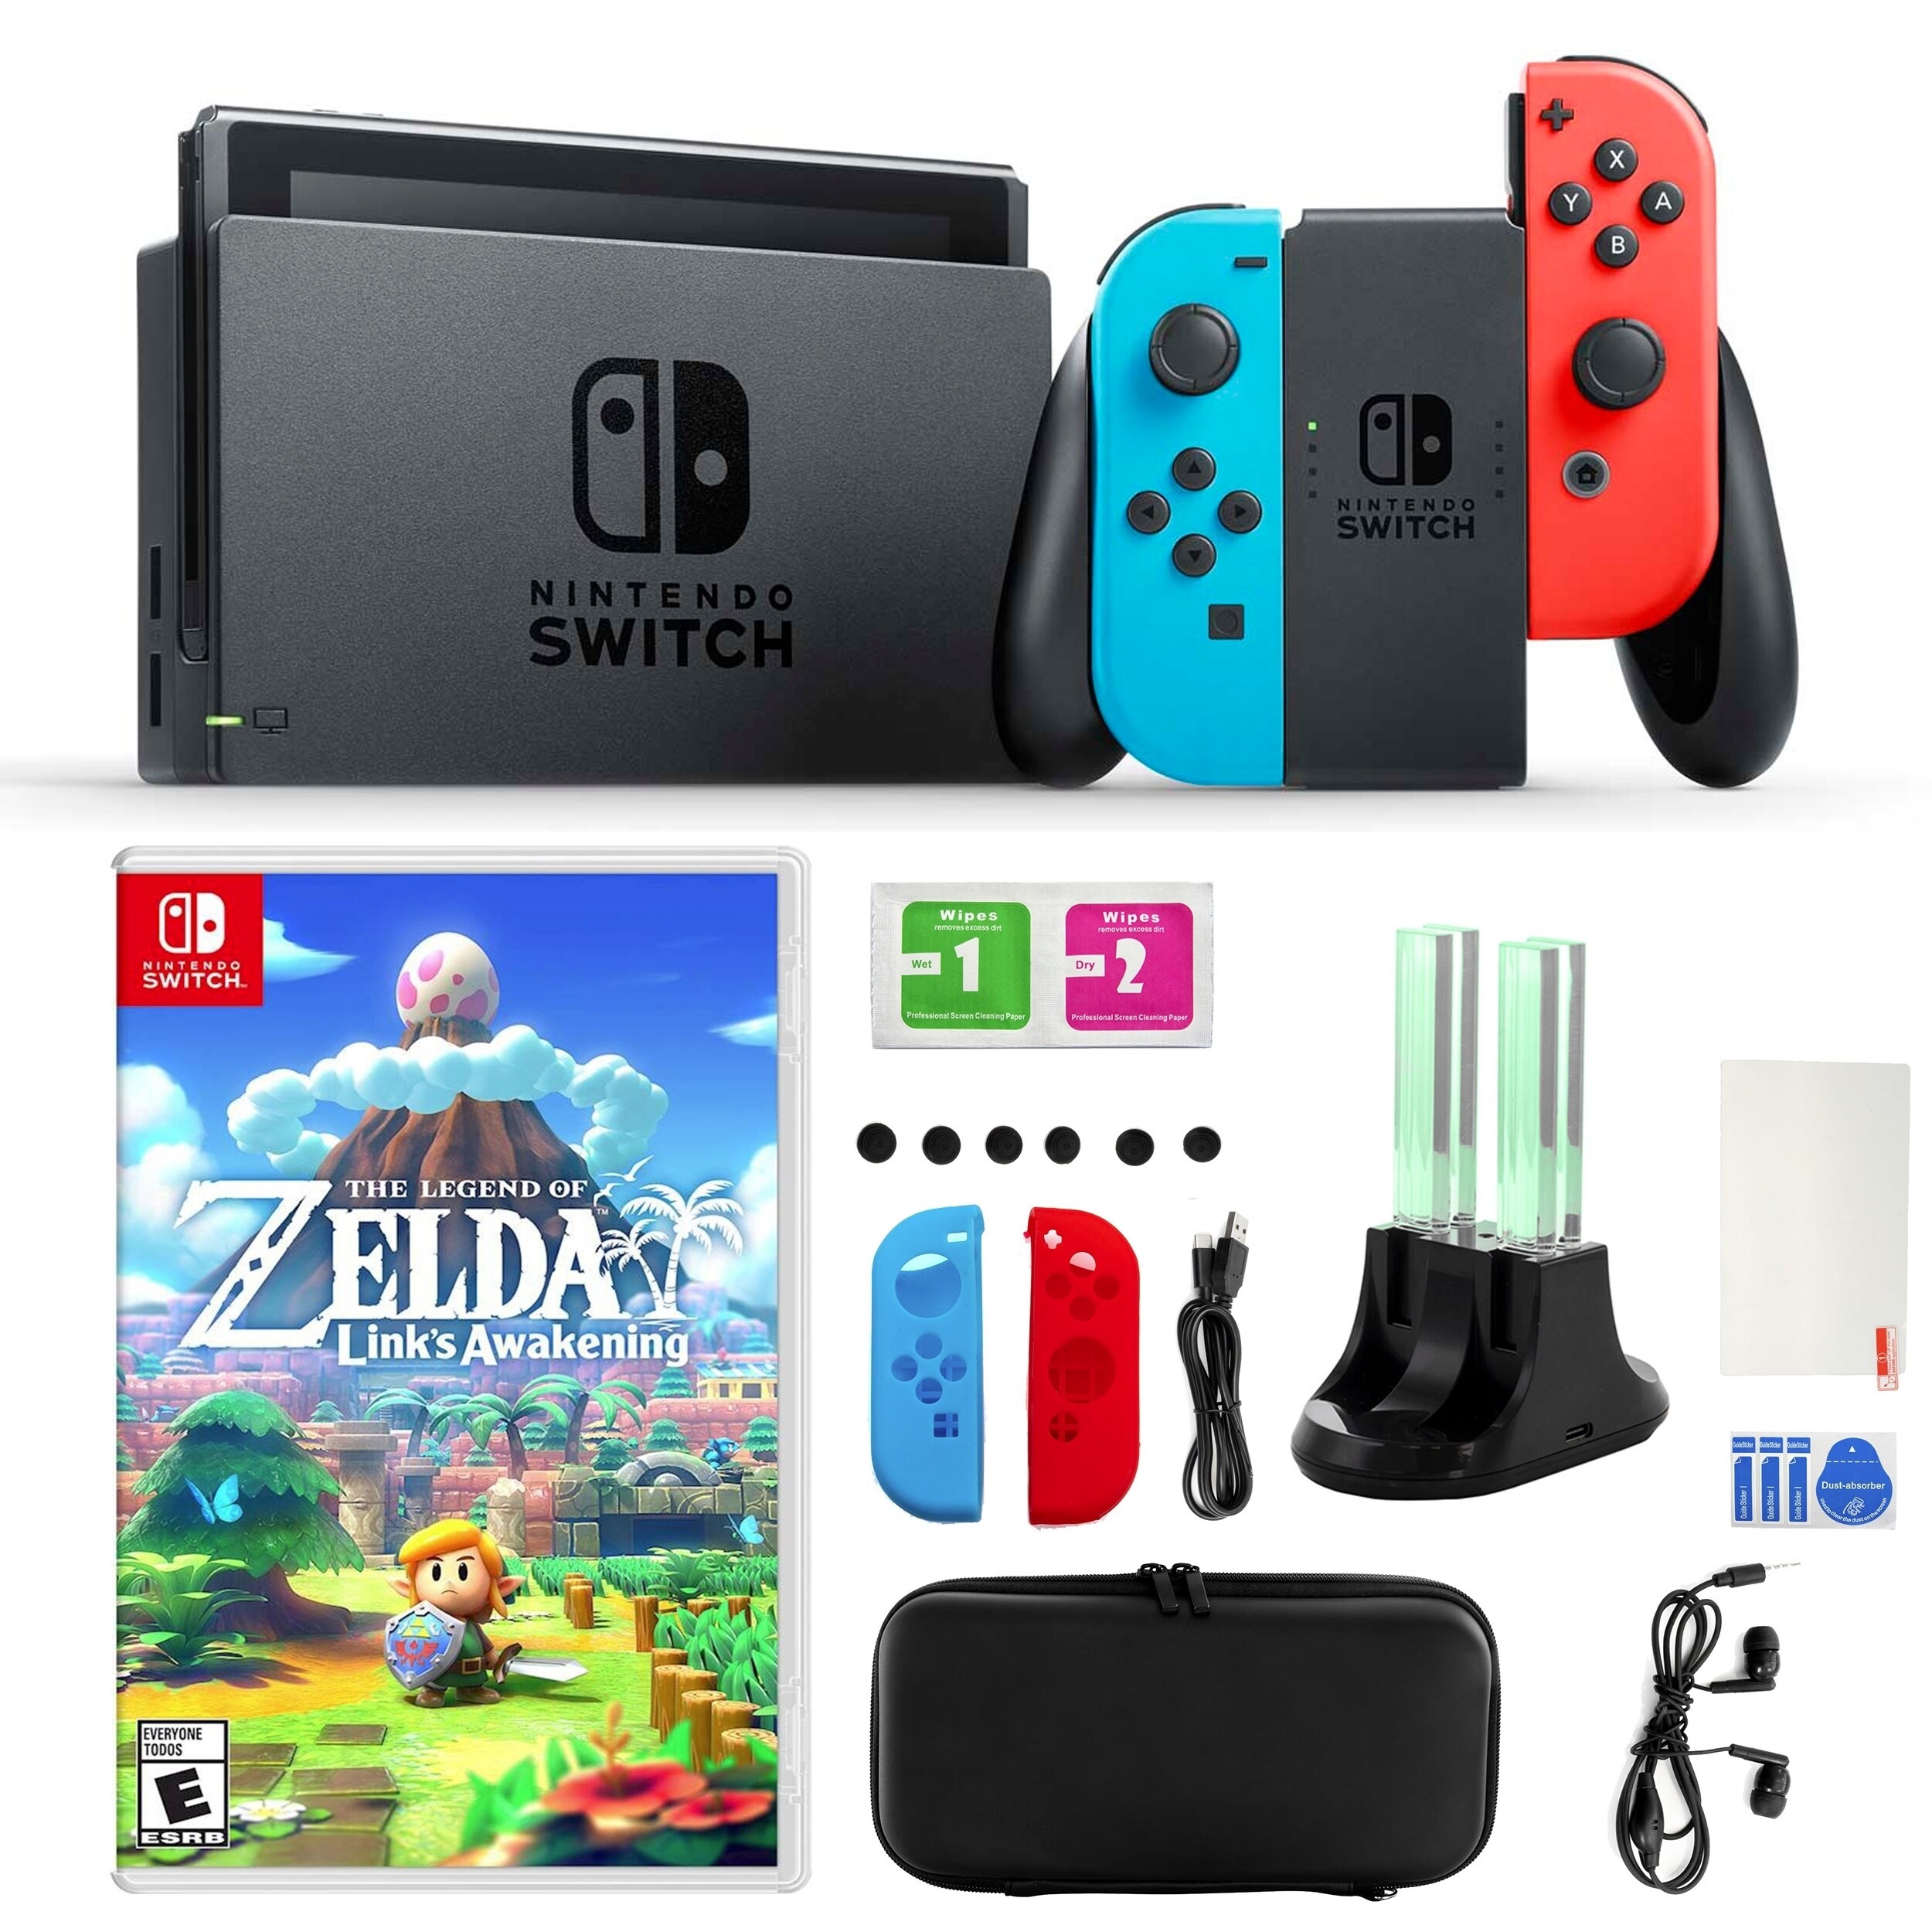 nintendo switch with all accessories